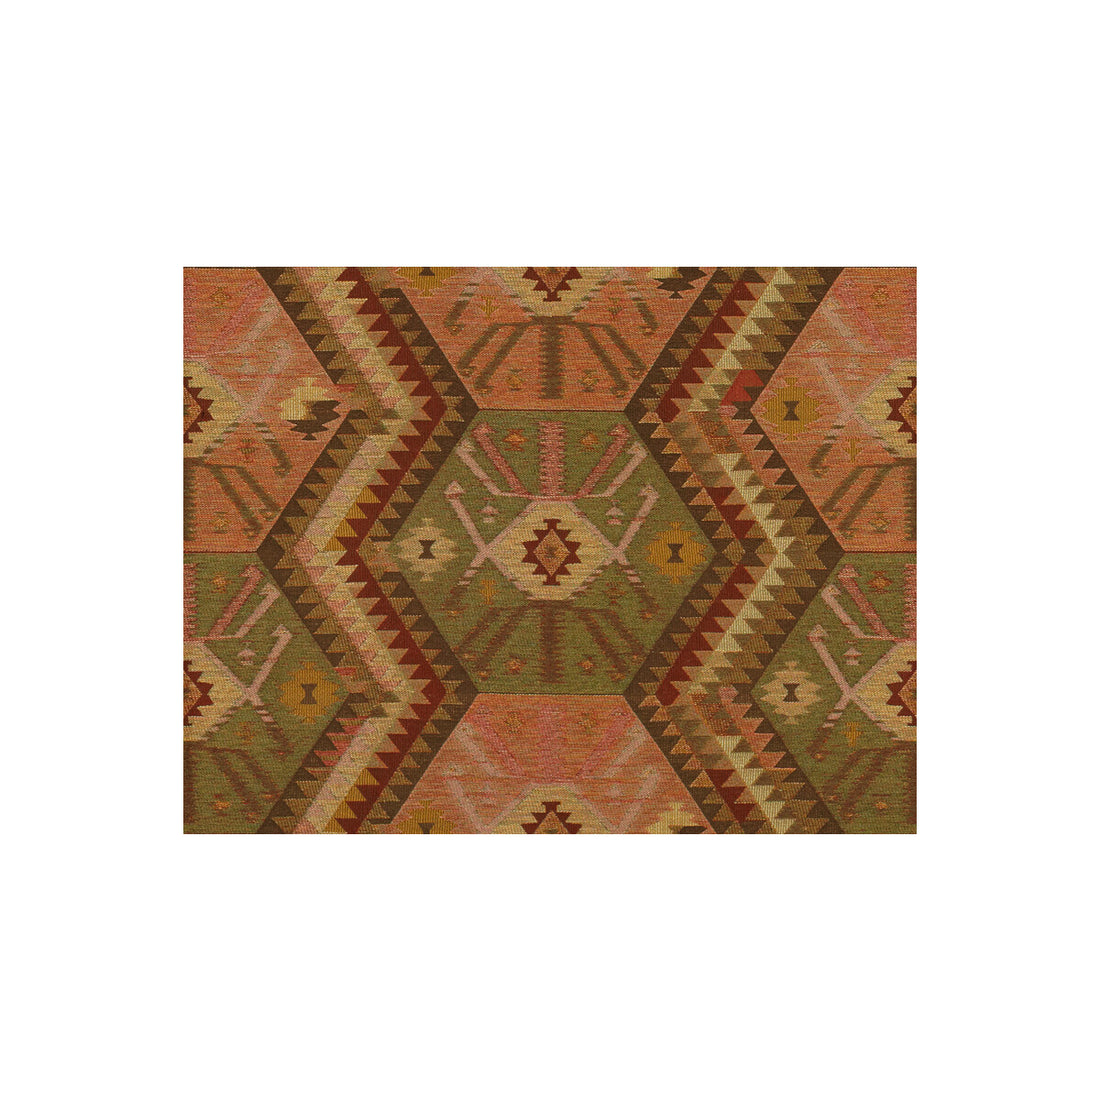 Heritage Kilim fabric in antique color - pattern 32356.312.0 - by Kravet Couture in the Nomad Chic collection